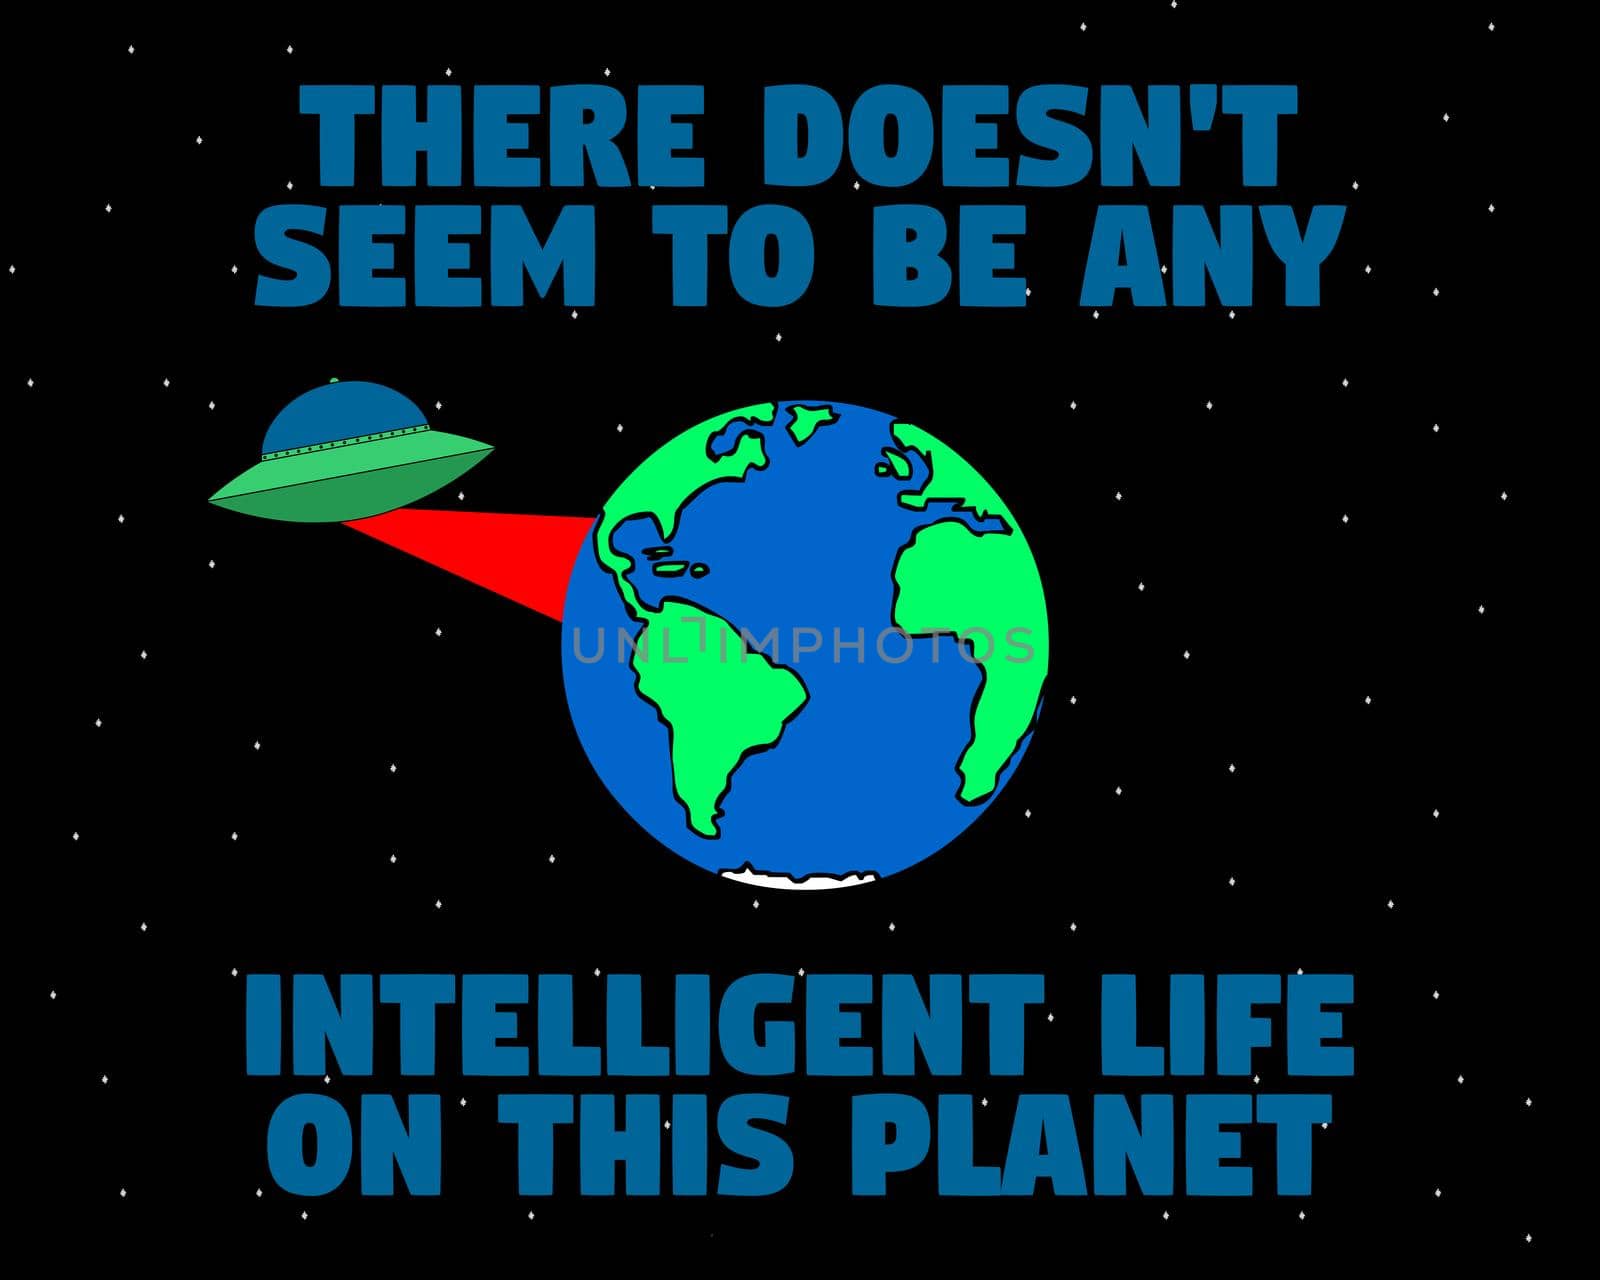 No intelligent life on this planet by Bigalbaloo